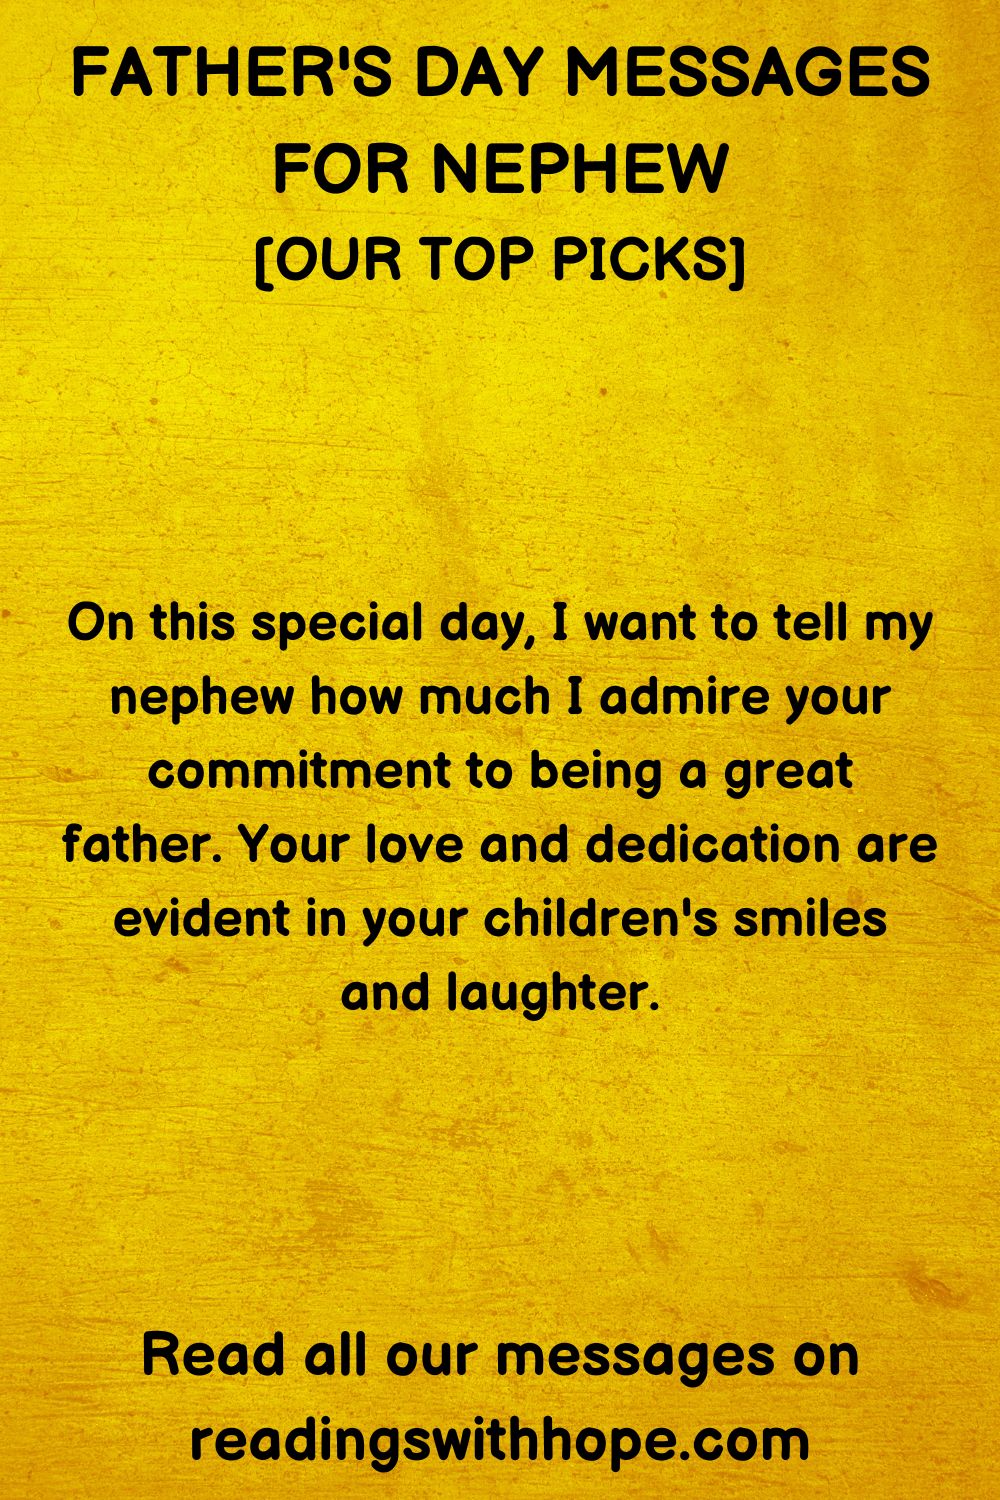 Father's Day Message for Nephew